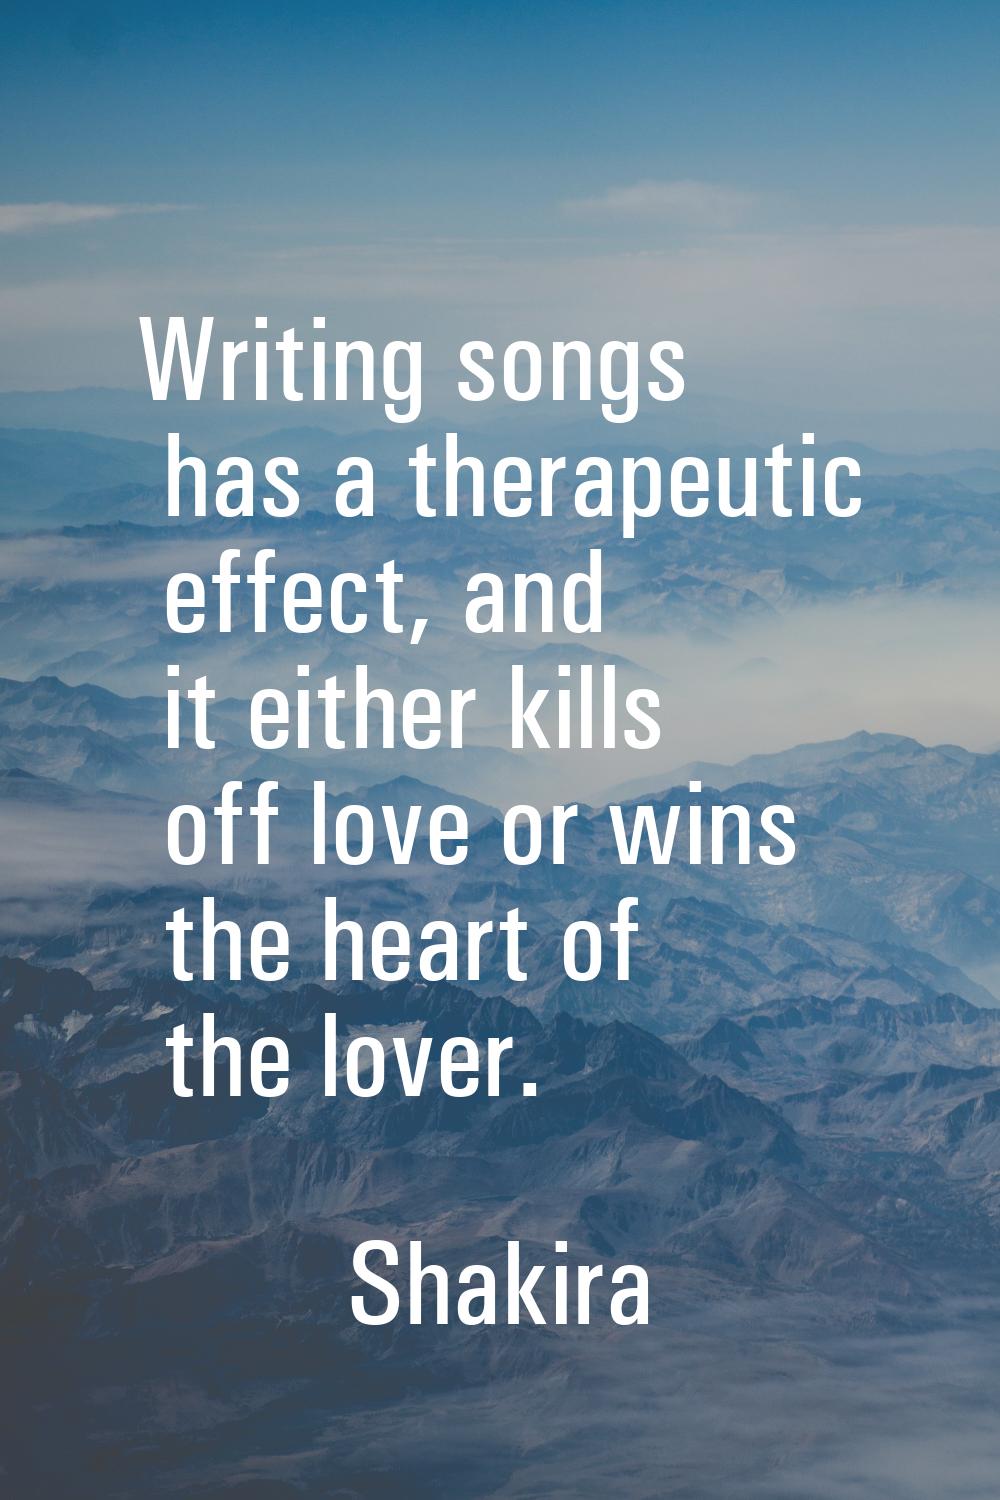 Writing songs has a therapeutic effect, and it either kills off love or wins the heart of the lover